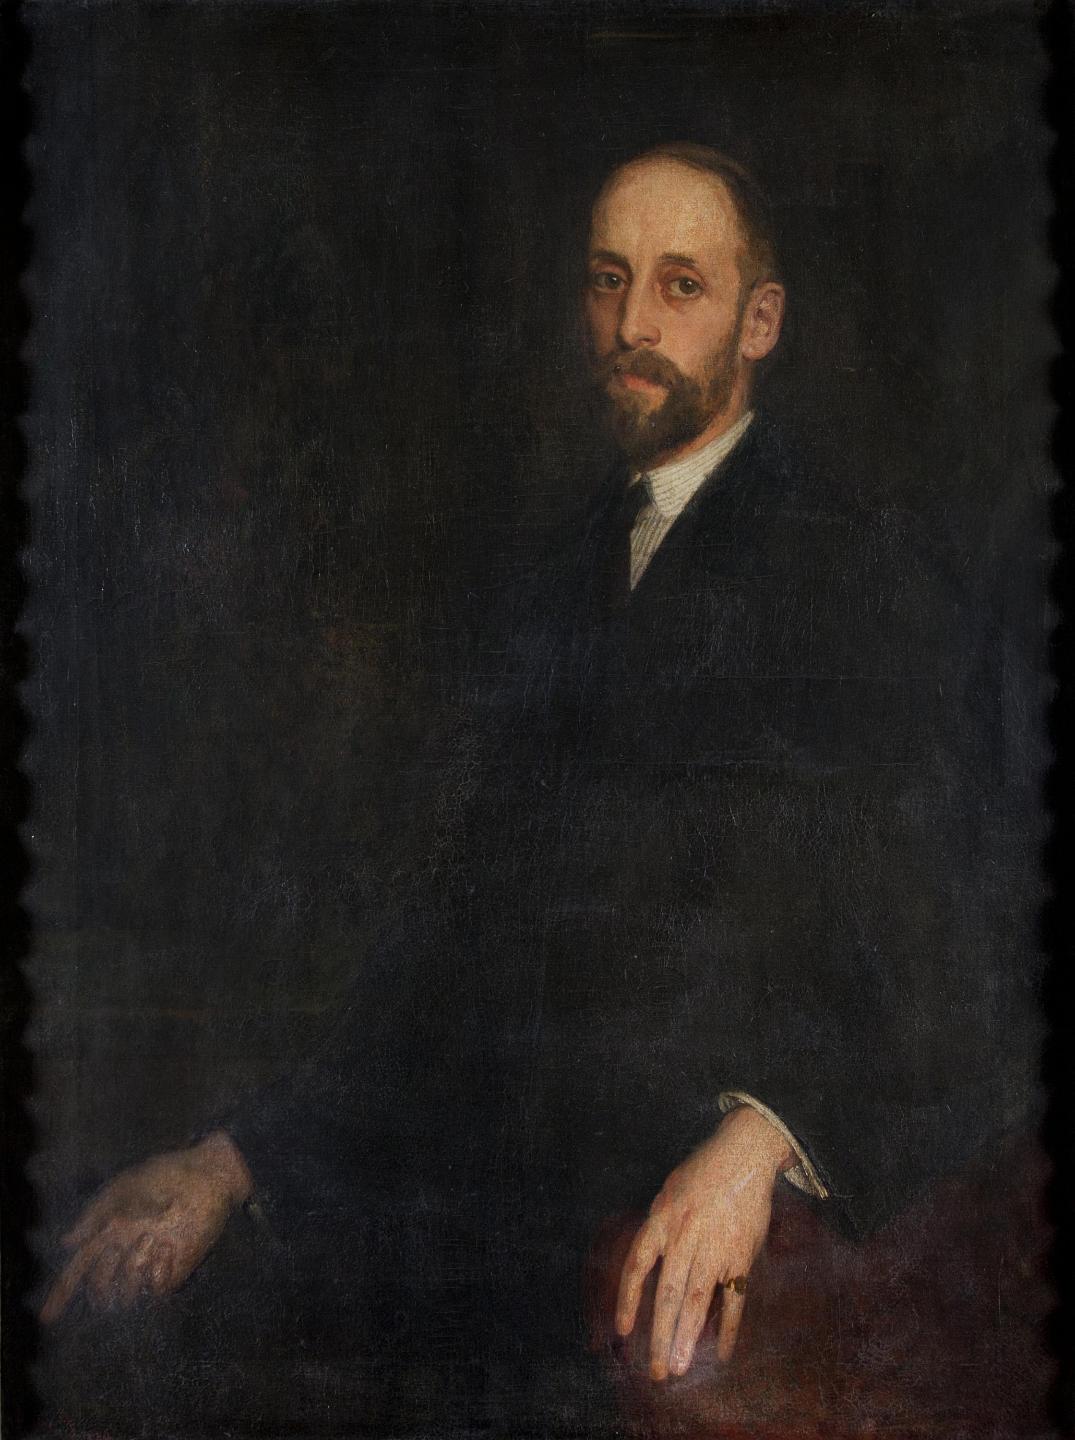 Gerald Festus Kelly, Portrait of Sir Hugh Lane, c.1911, oil on canvas, 112.3 x 84.4 cm. Purchased, with assistance from the Friends of the National Collections of Ireland, 1961 (Gibson Bequest Fund).